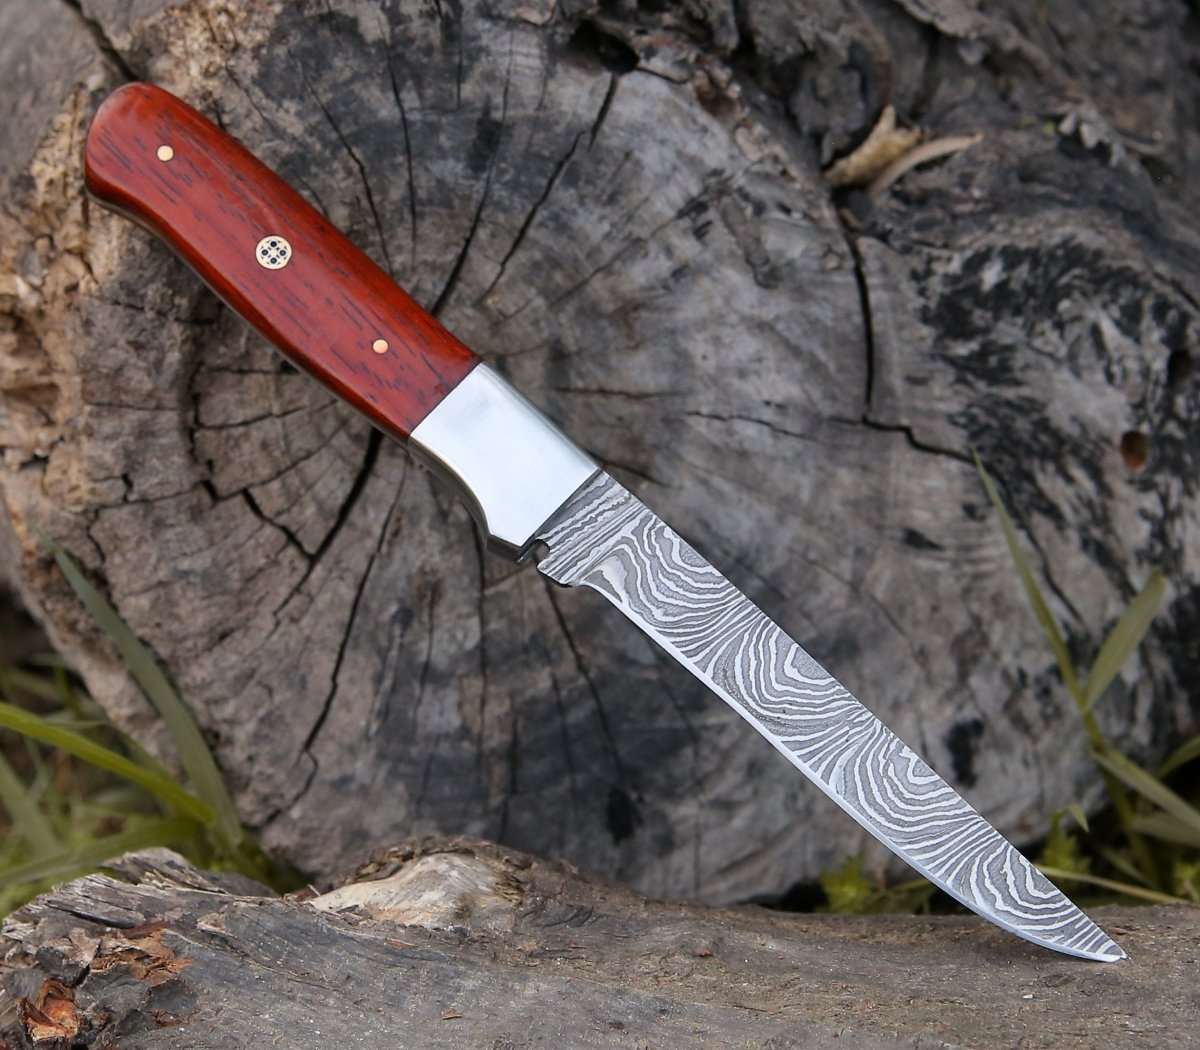 Shokunin USA Cutmaster 10.5" Damascus Fillet Knife With Exotic Red Heart Handle - Angler's Pro Tackle & Outdoors